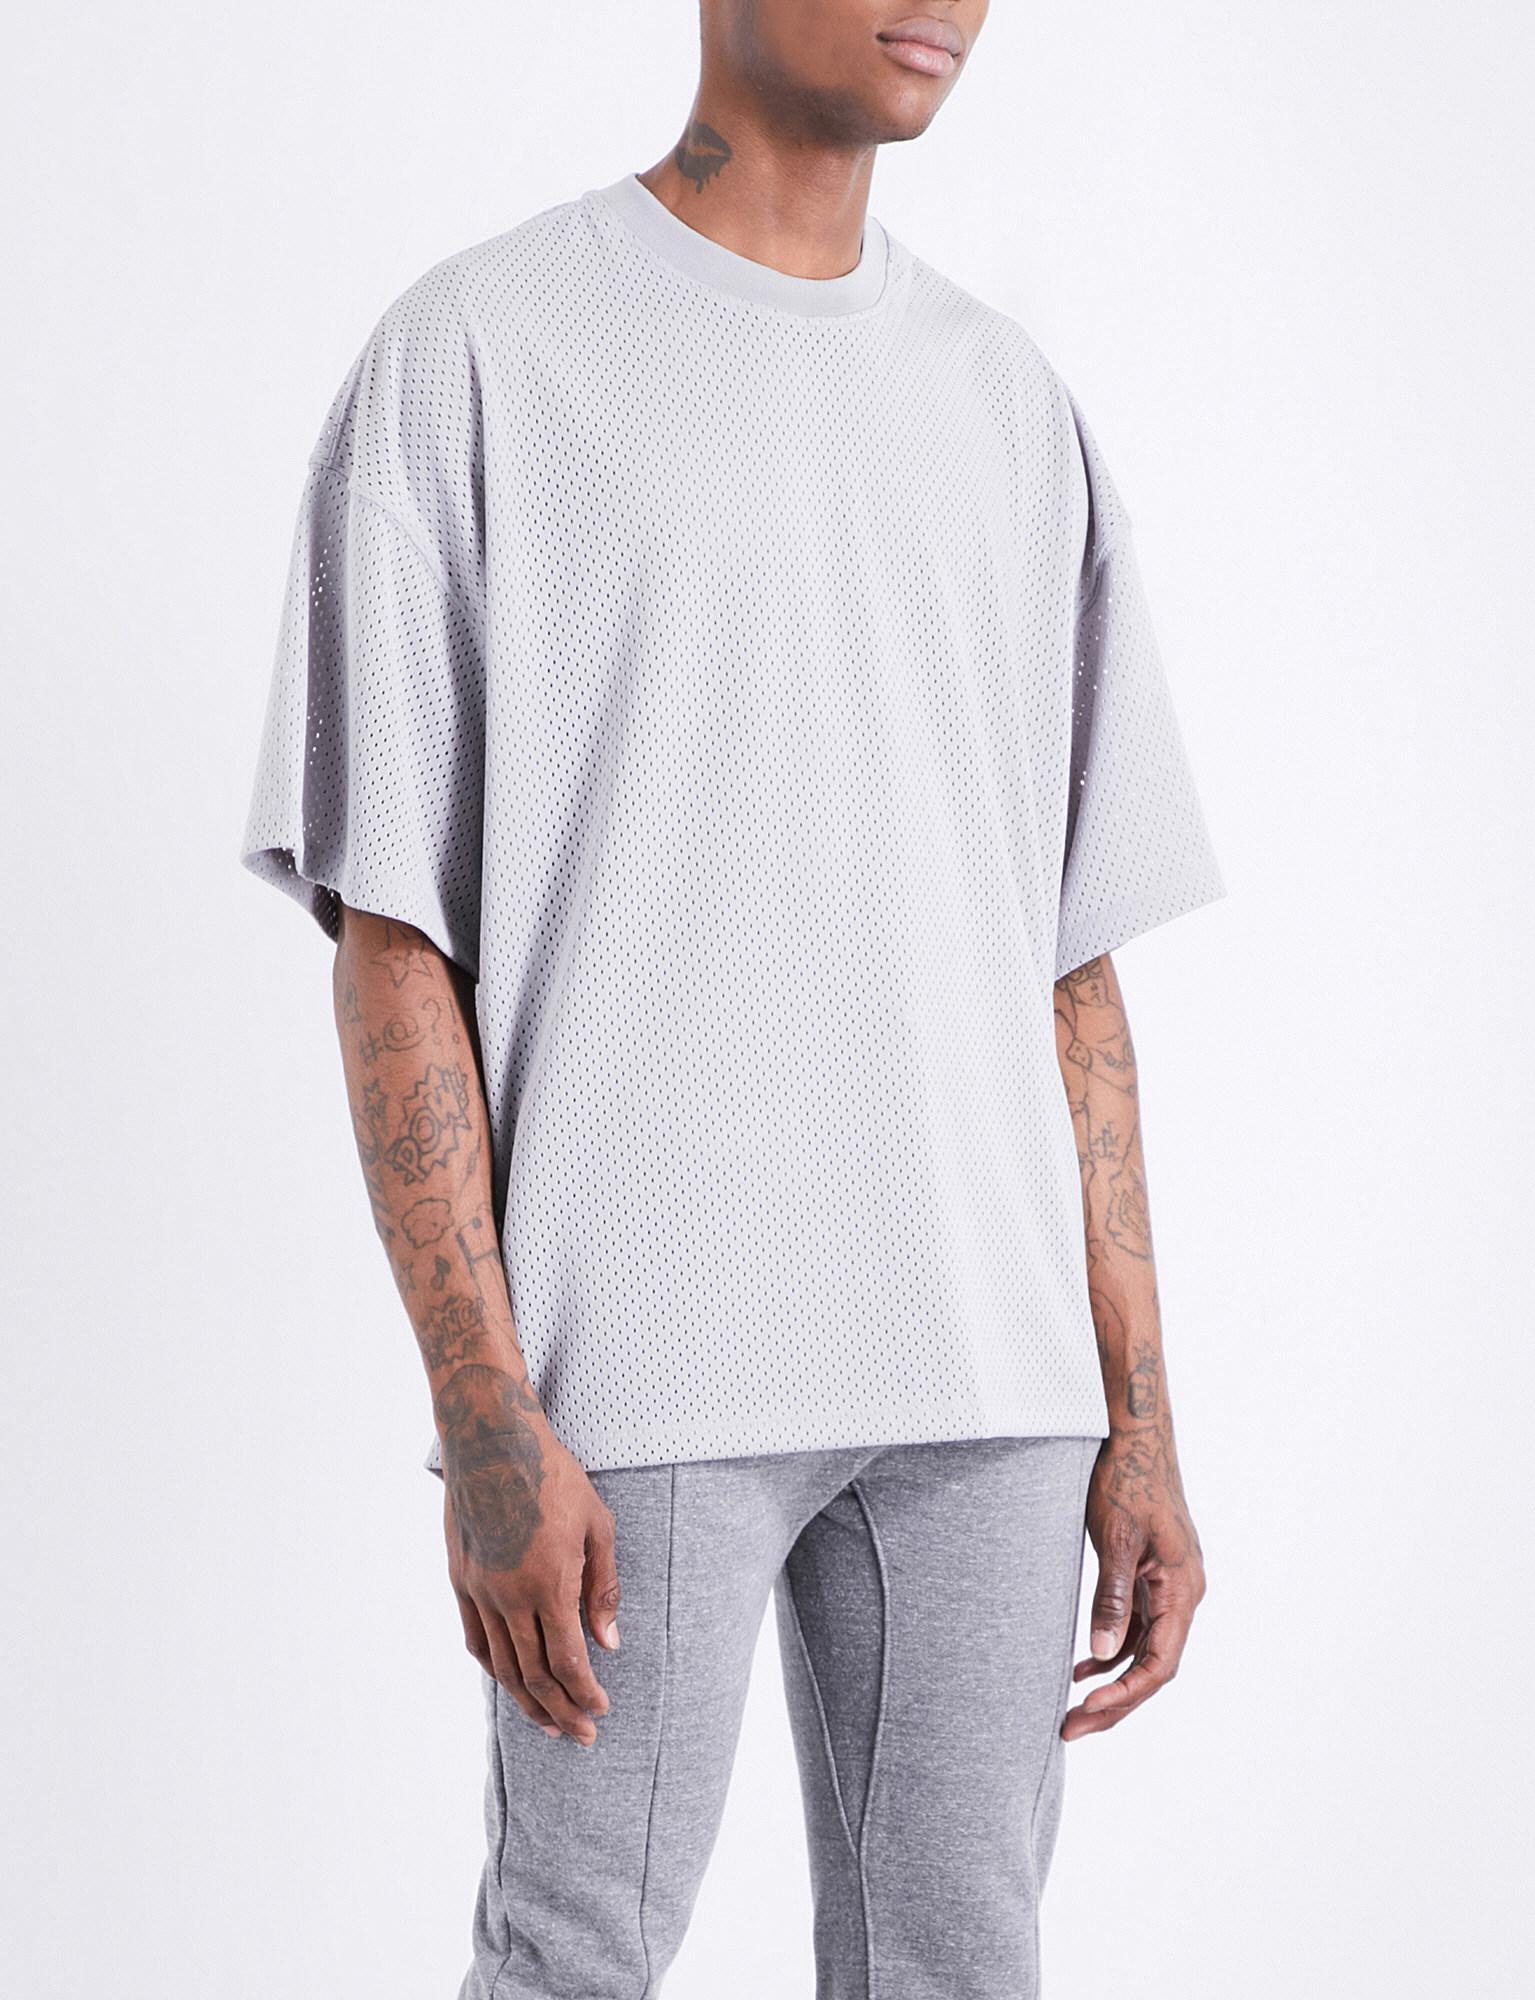 Fear Of God Fifth Collection Batting Practice Mesh Top in Gray for